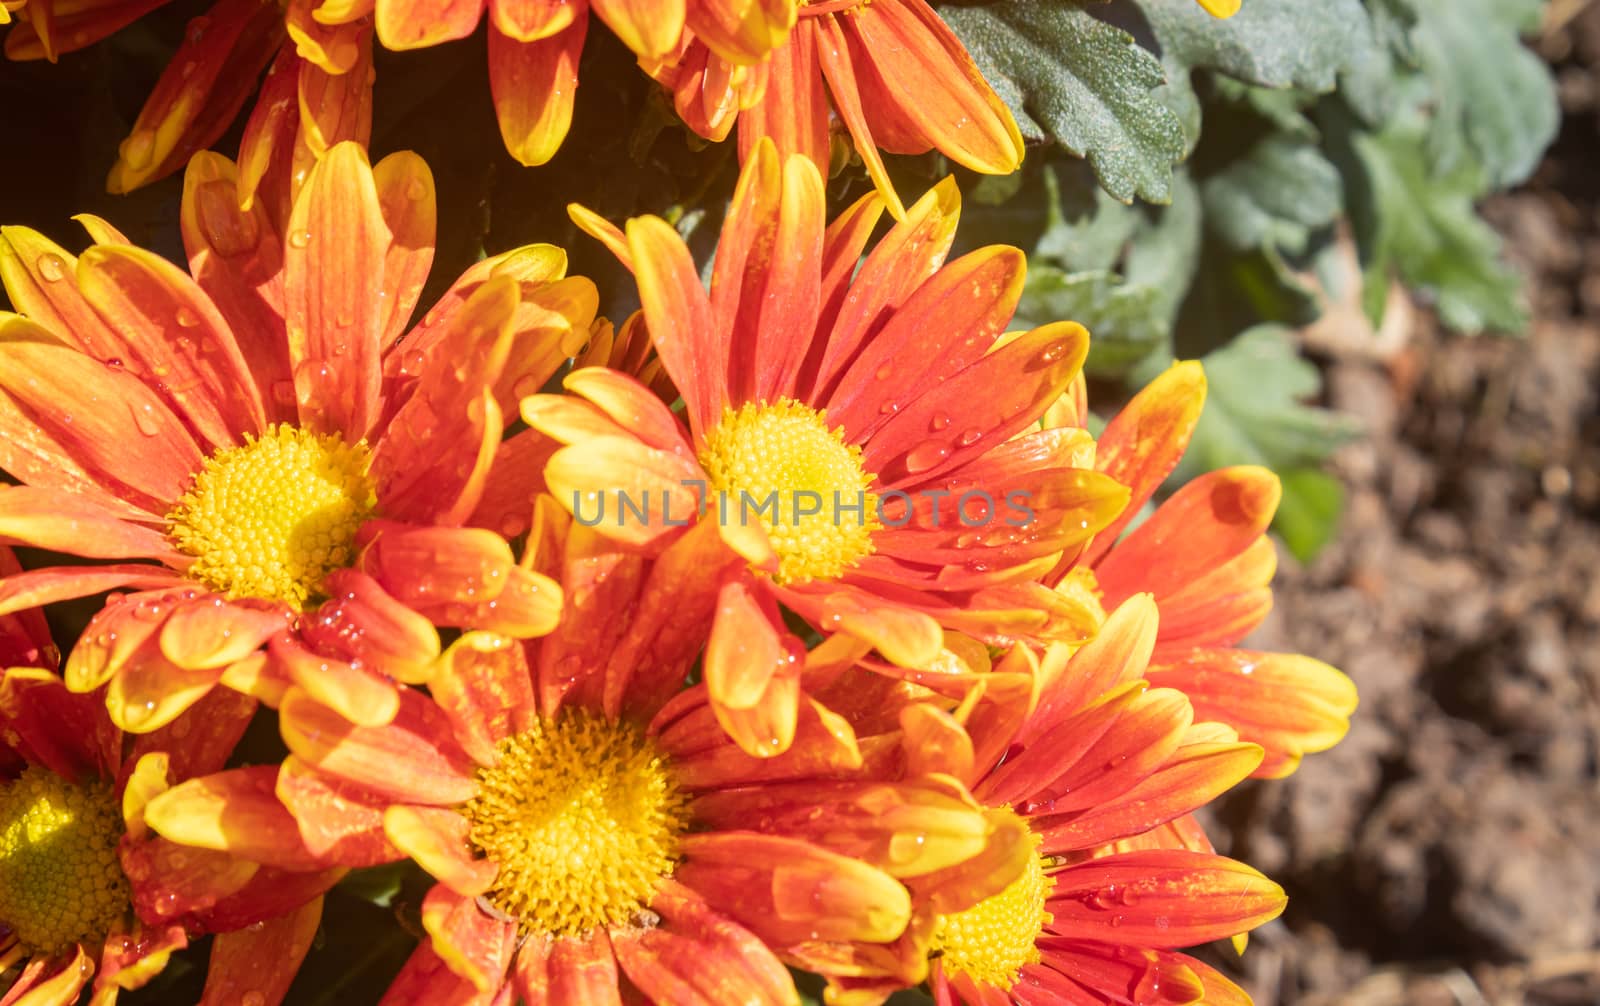 Orange Gerbera Daisy or Gerbera Flower with Water Drop and Natural Light in Garden on Left Frame